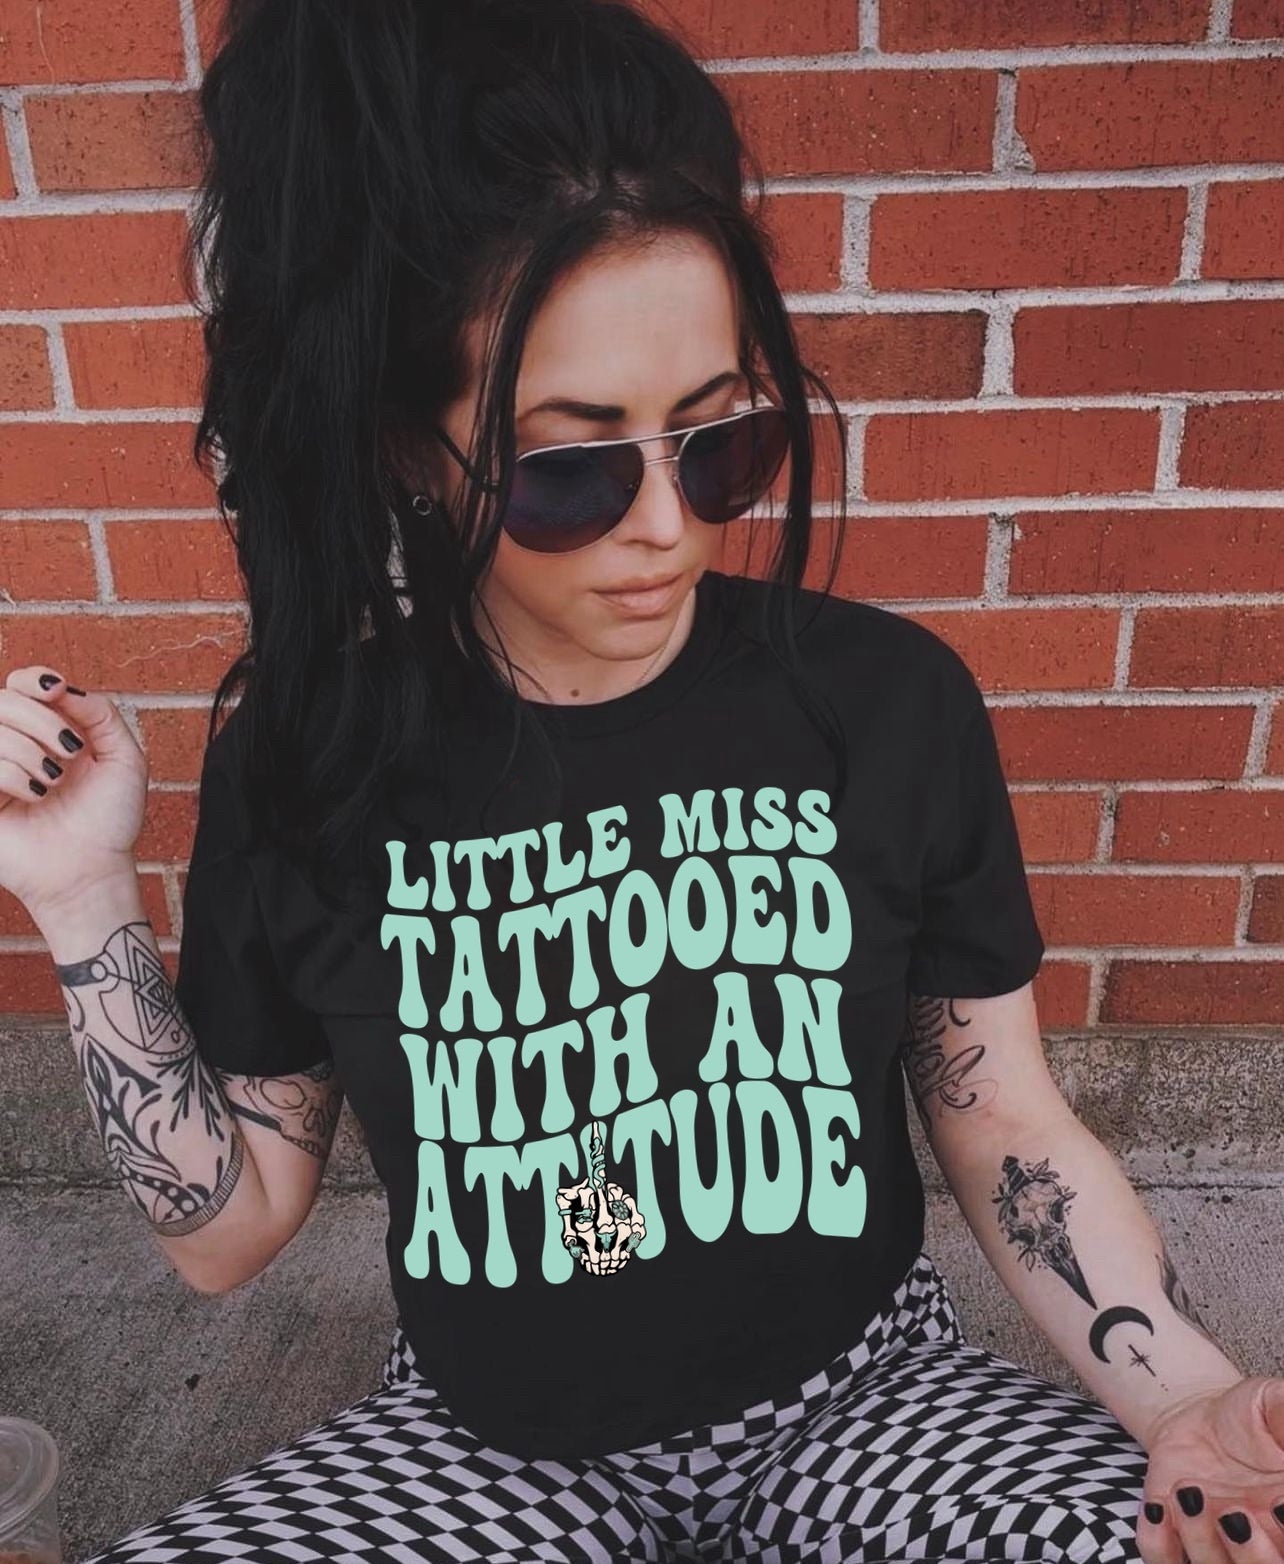 Tattooed With An Attitude